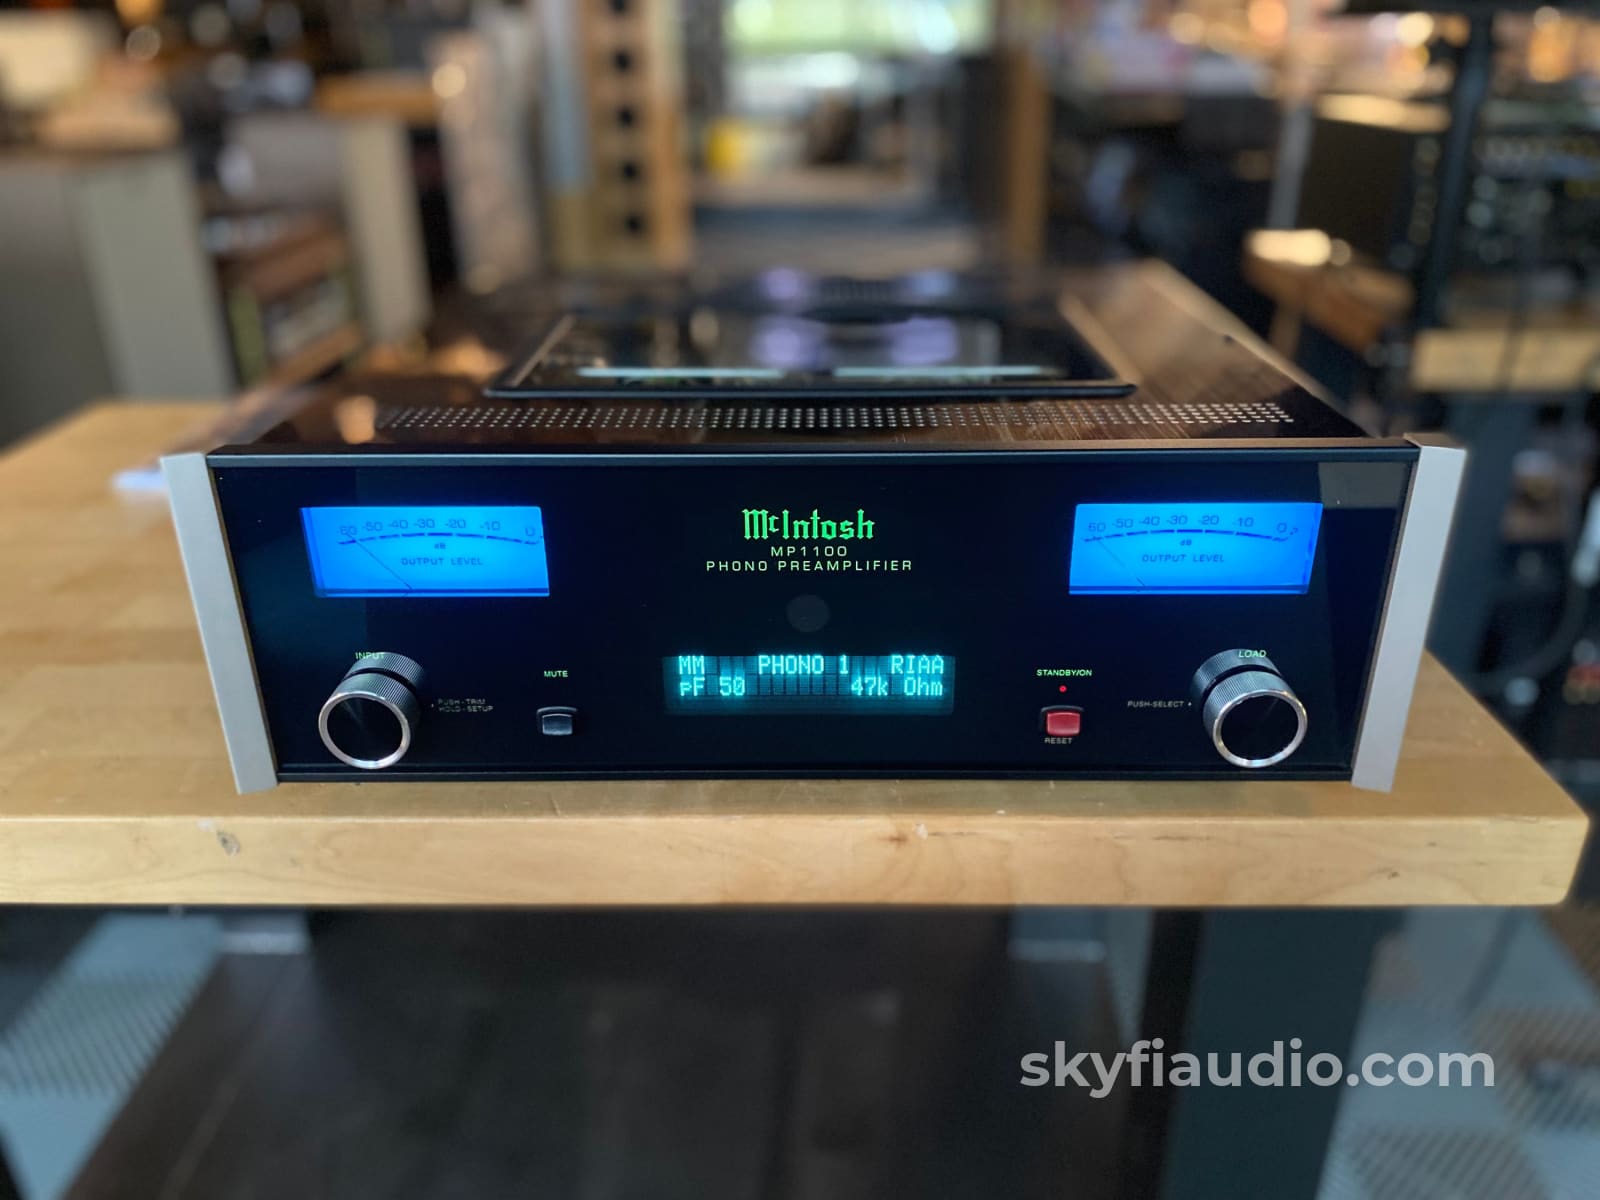 https://skyfiaudio.com/cdn/shop/files/mcintosh-mp1100-flagship-tube-phono-preamp-just-discontinued-last-one-preamplifier-344.jpg?v=1691610741&width=1600